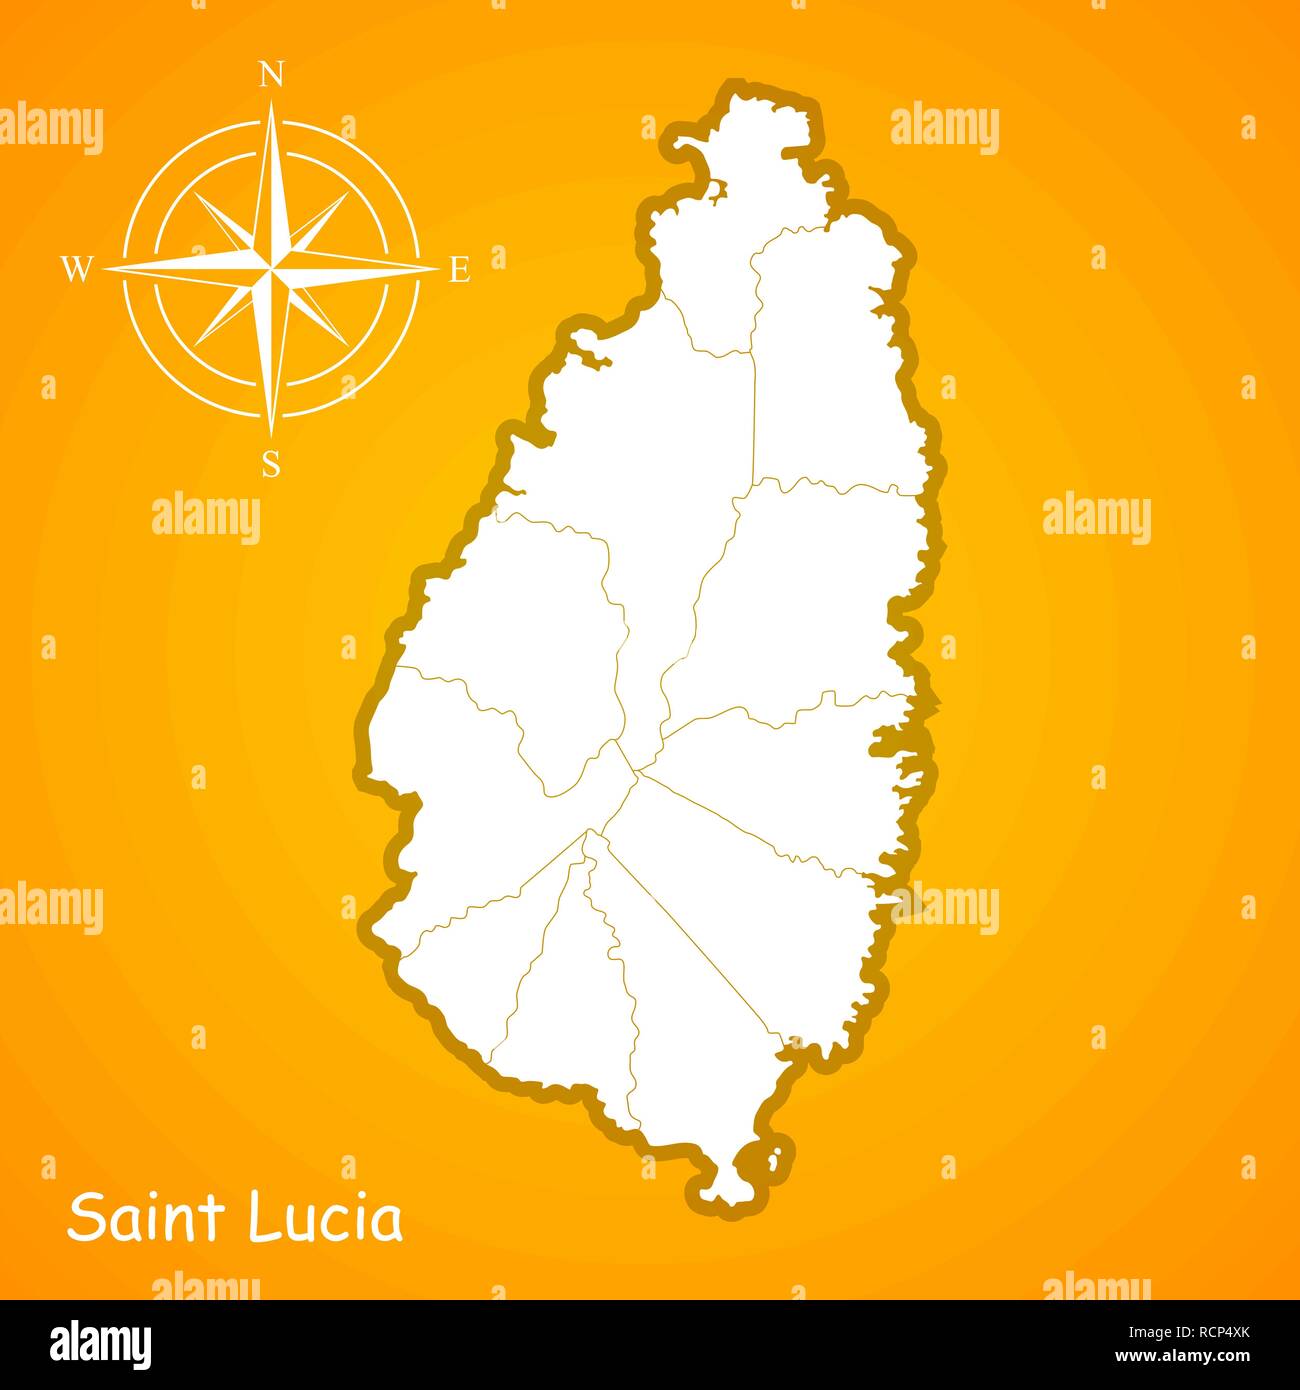 Map of Saint Lucia. Vector illustration. White map on bright orange background. Stock Vector